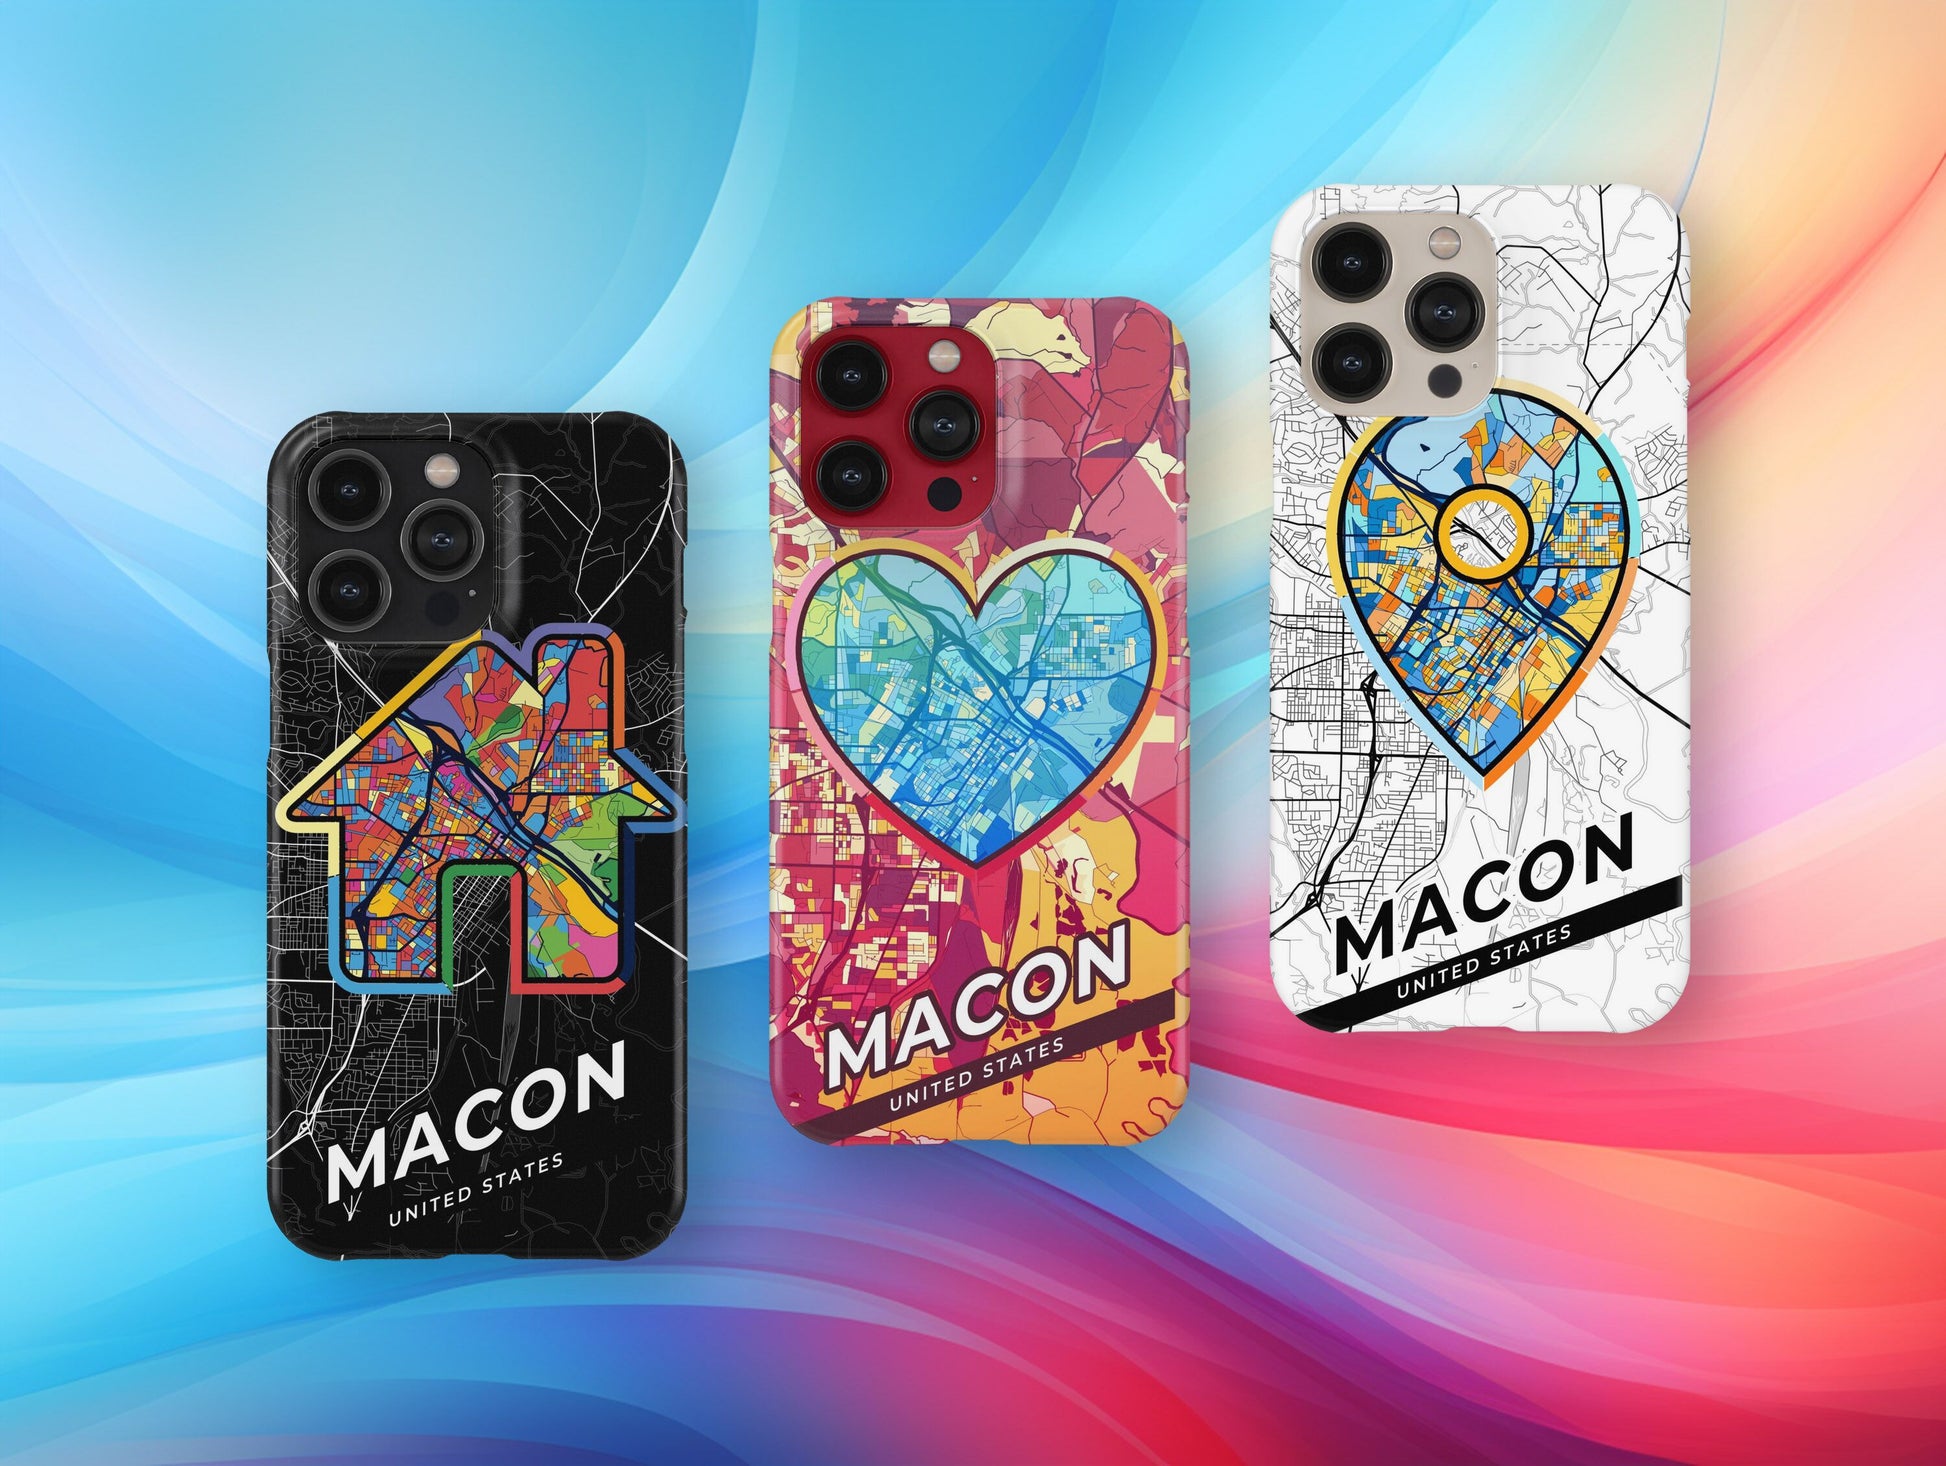 Macon Georgia slim phone case with colorful icon. Birthday, wedding or housewarming gift. Couple match cases.